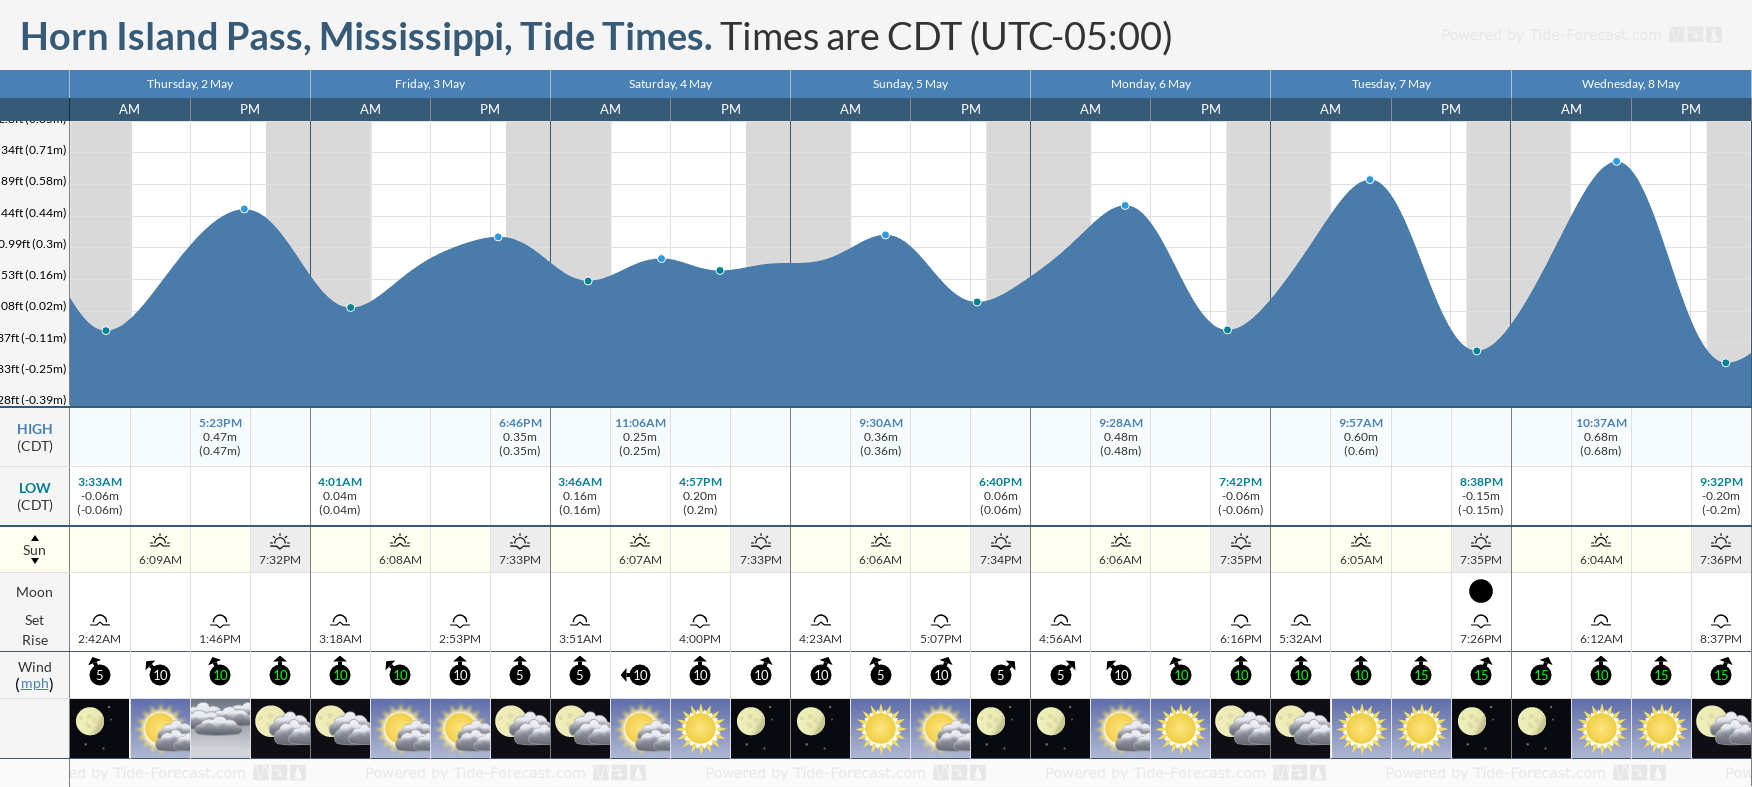 Horn Island Pass, Mississippi Tide Chart including high and low tide times for the next 7 days